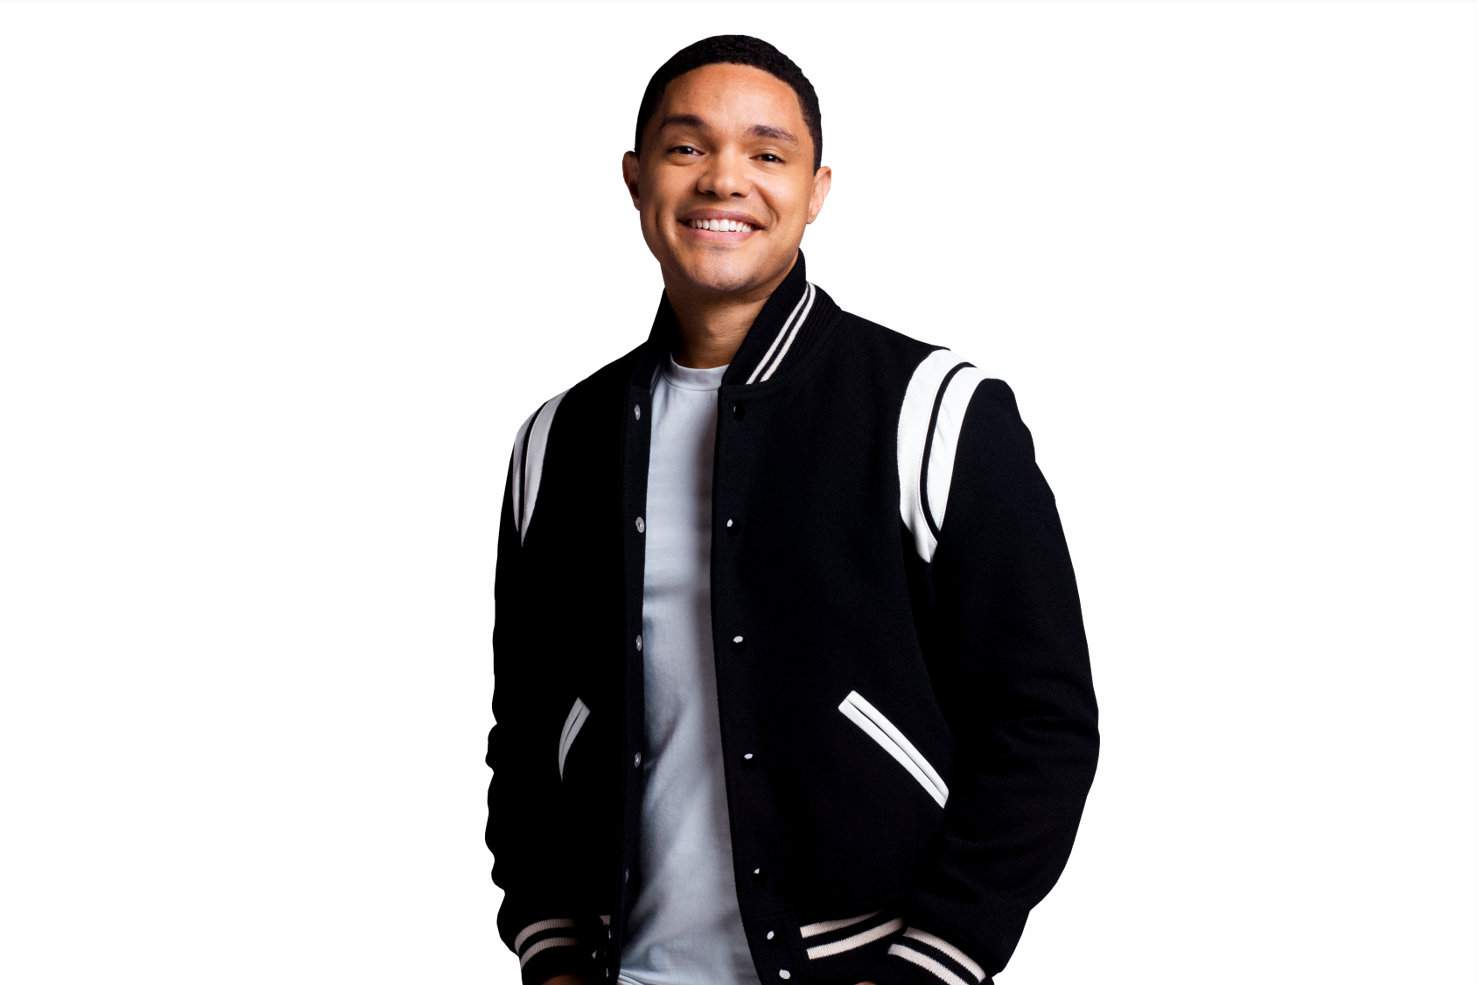 University of Michigan to host free virtual event with Trevor Noah